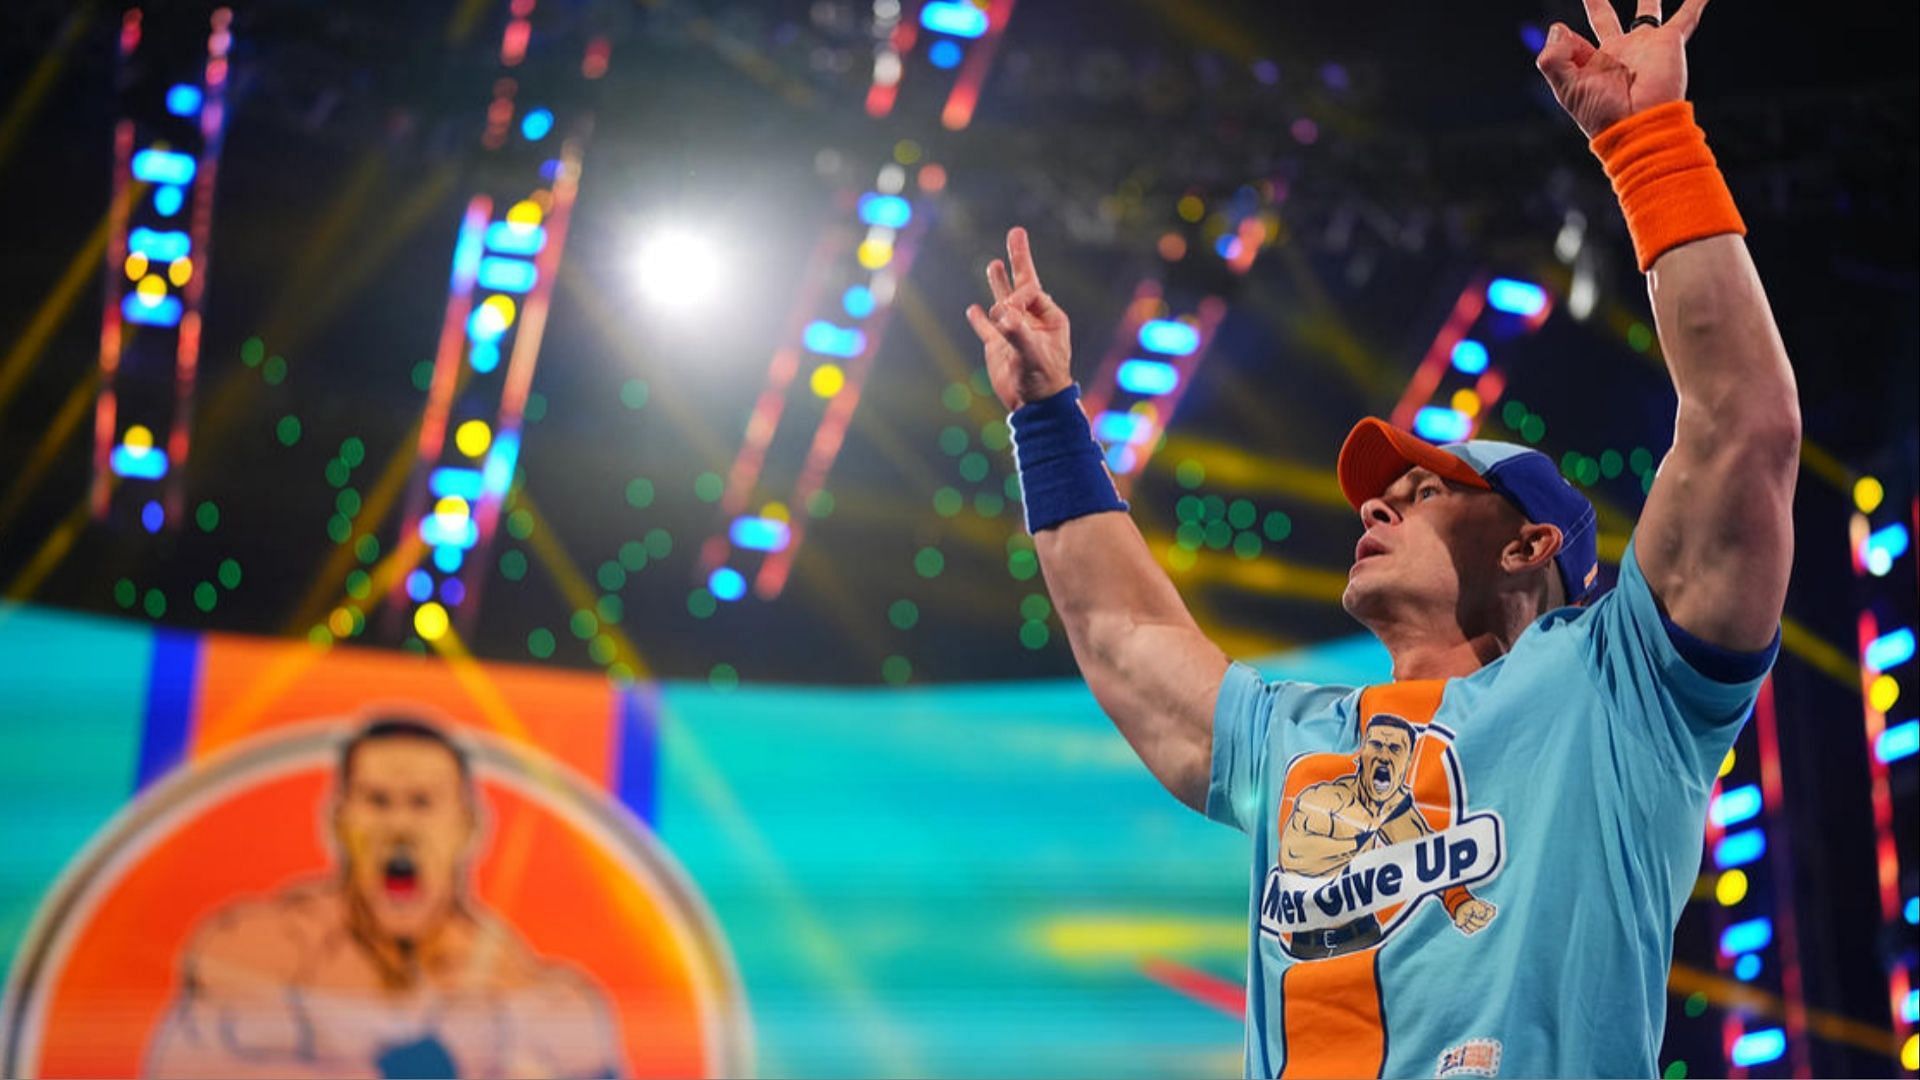 John Cena poses during his entrance on WWE SmackDown.